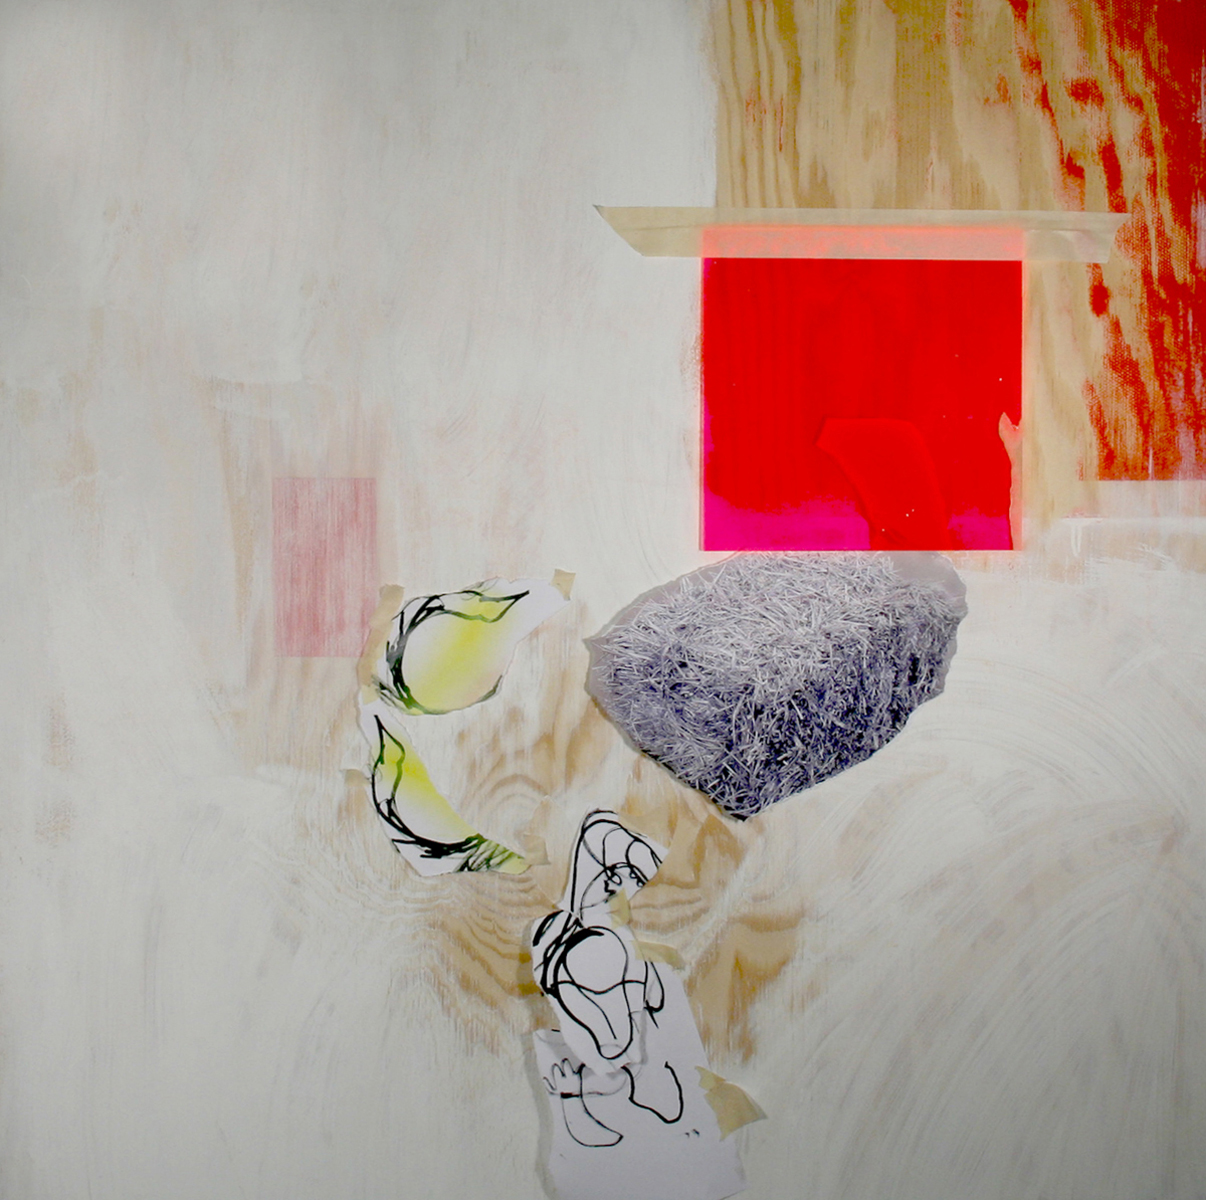 Paintings by Justine Frischmann - new work